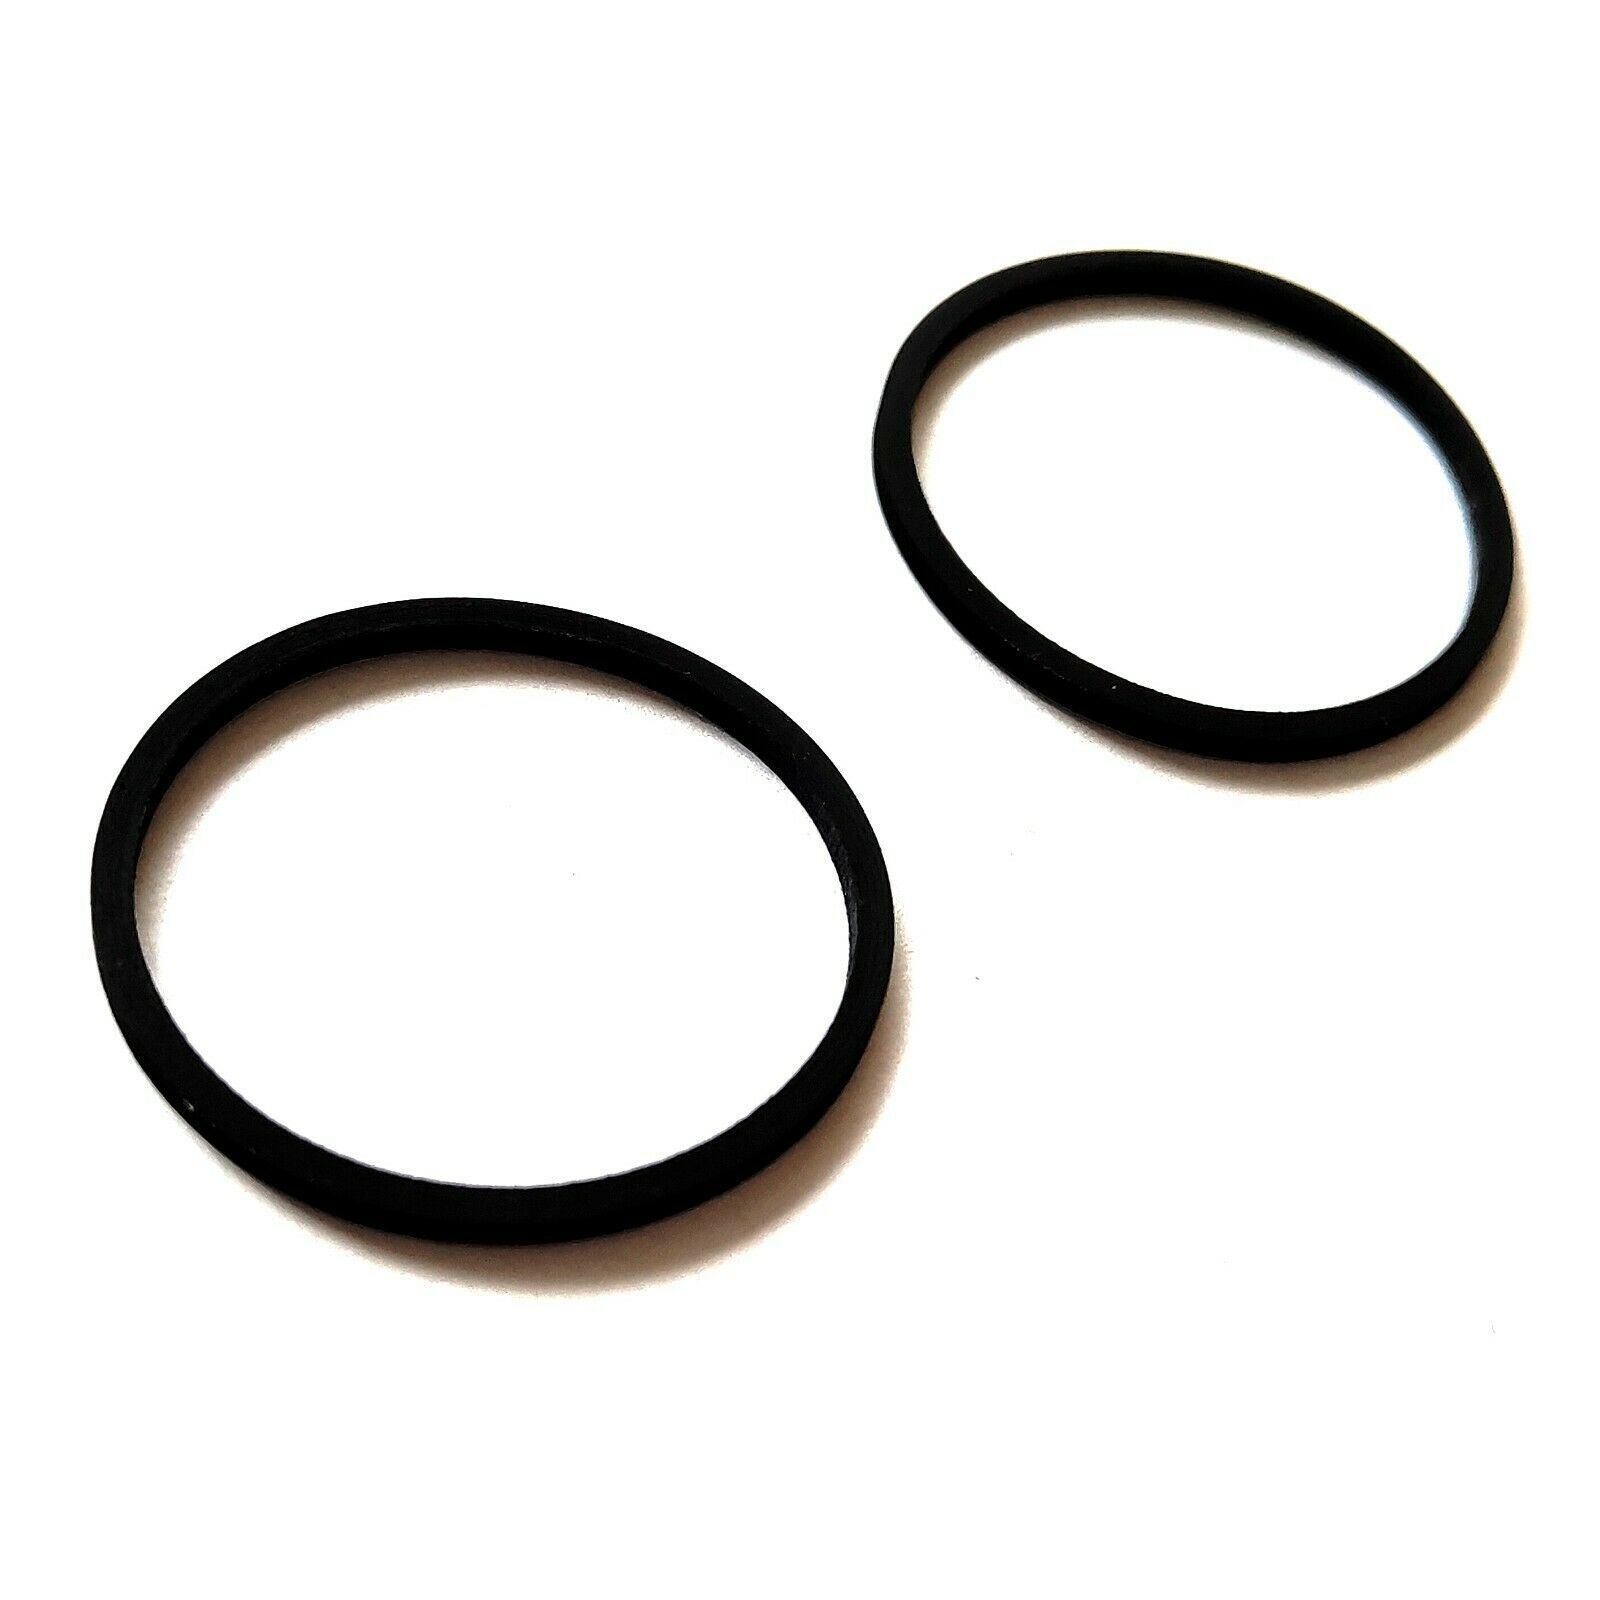 2x Replacement Repair Drive Belt For Sega CD Model 1 & Mega CD System Console Unbranded Does not apply - фотография #2